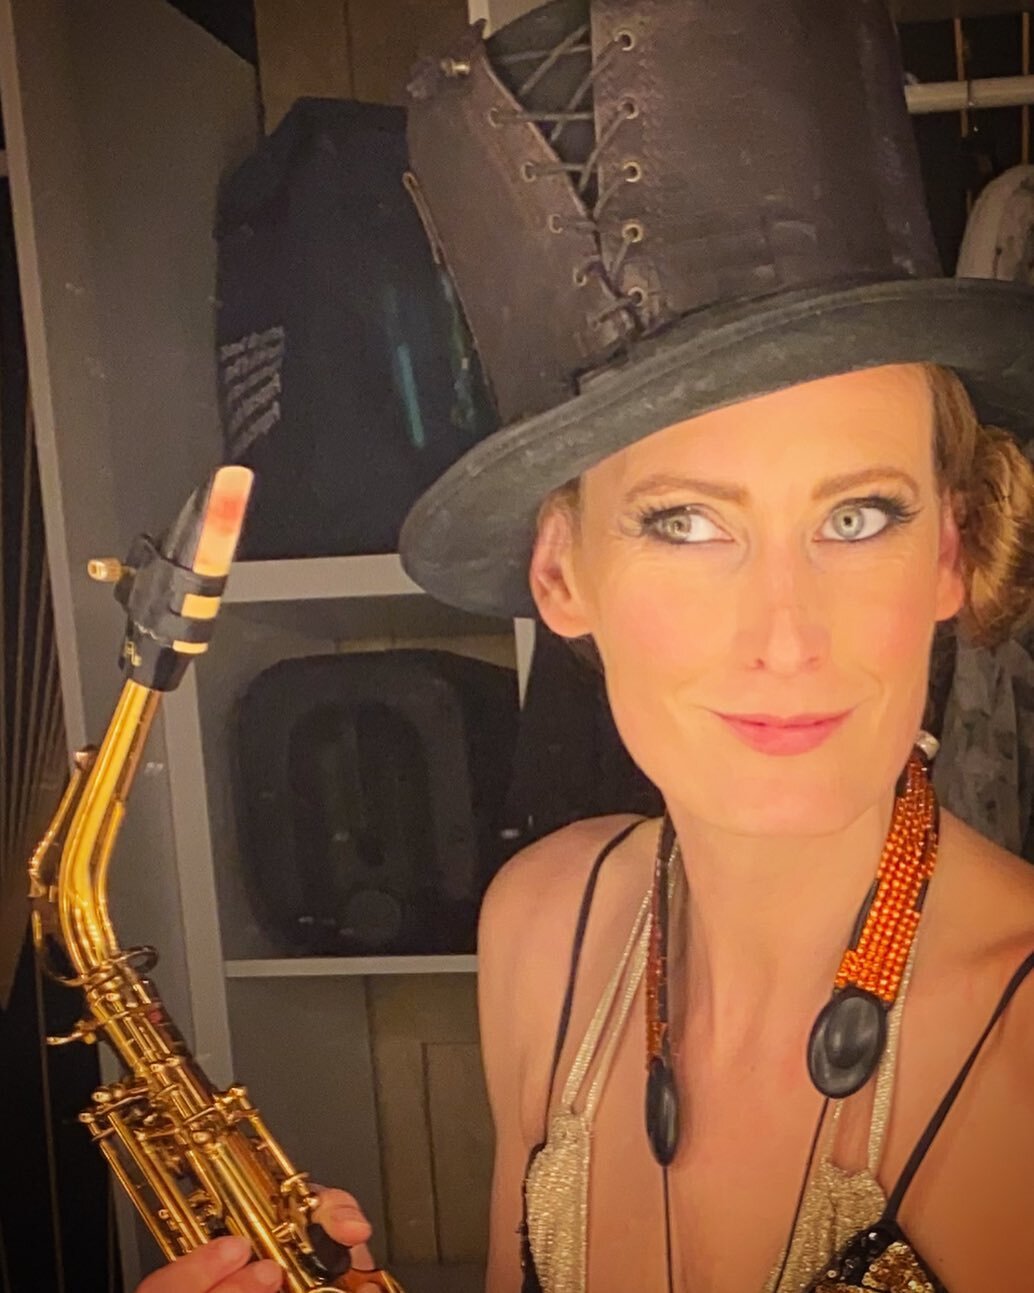 So loved playing @proudlateldn last week, what a venue, what a vibe. Thanks so much @scevents #lifeisacabaret #cabaretsax #steampunksax #saxdj #femalesaxayer #selmersax